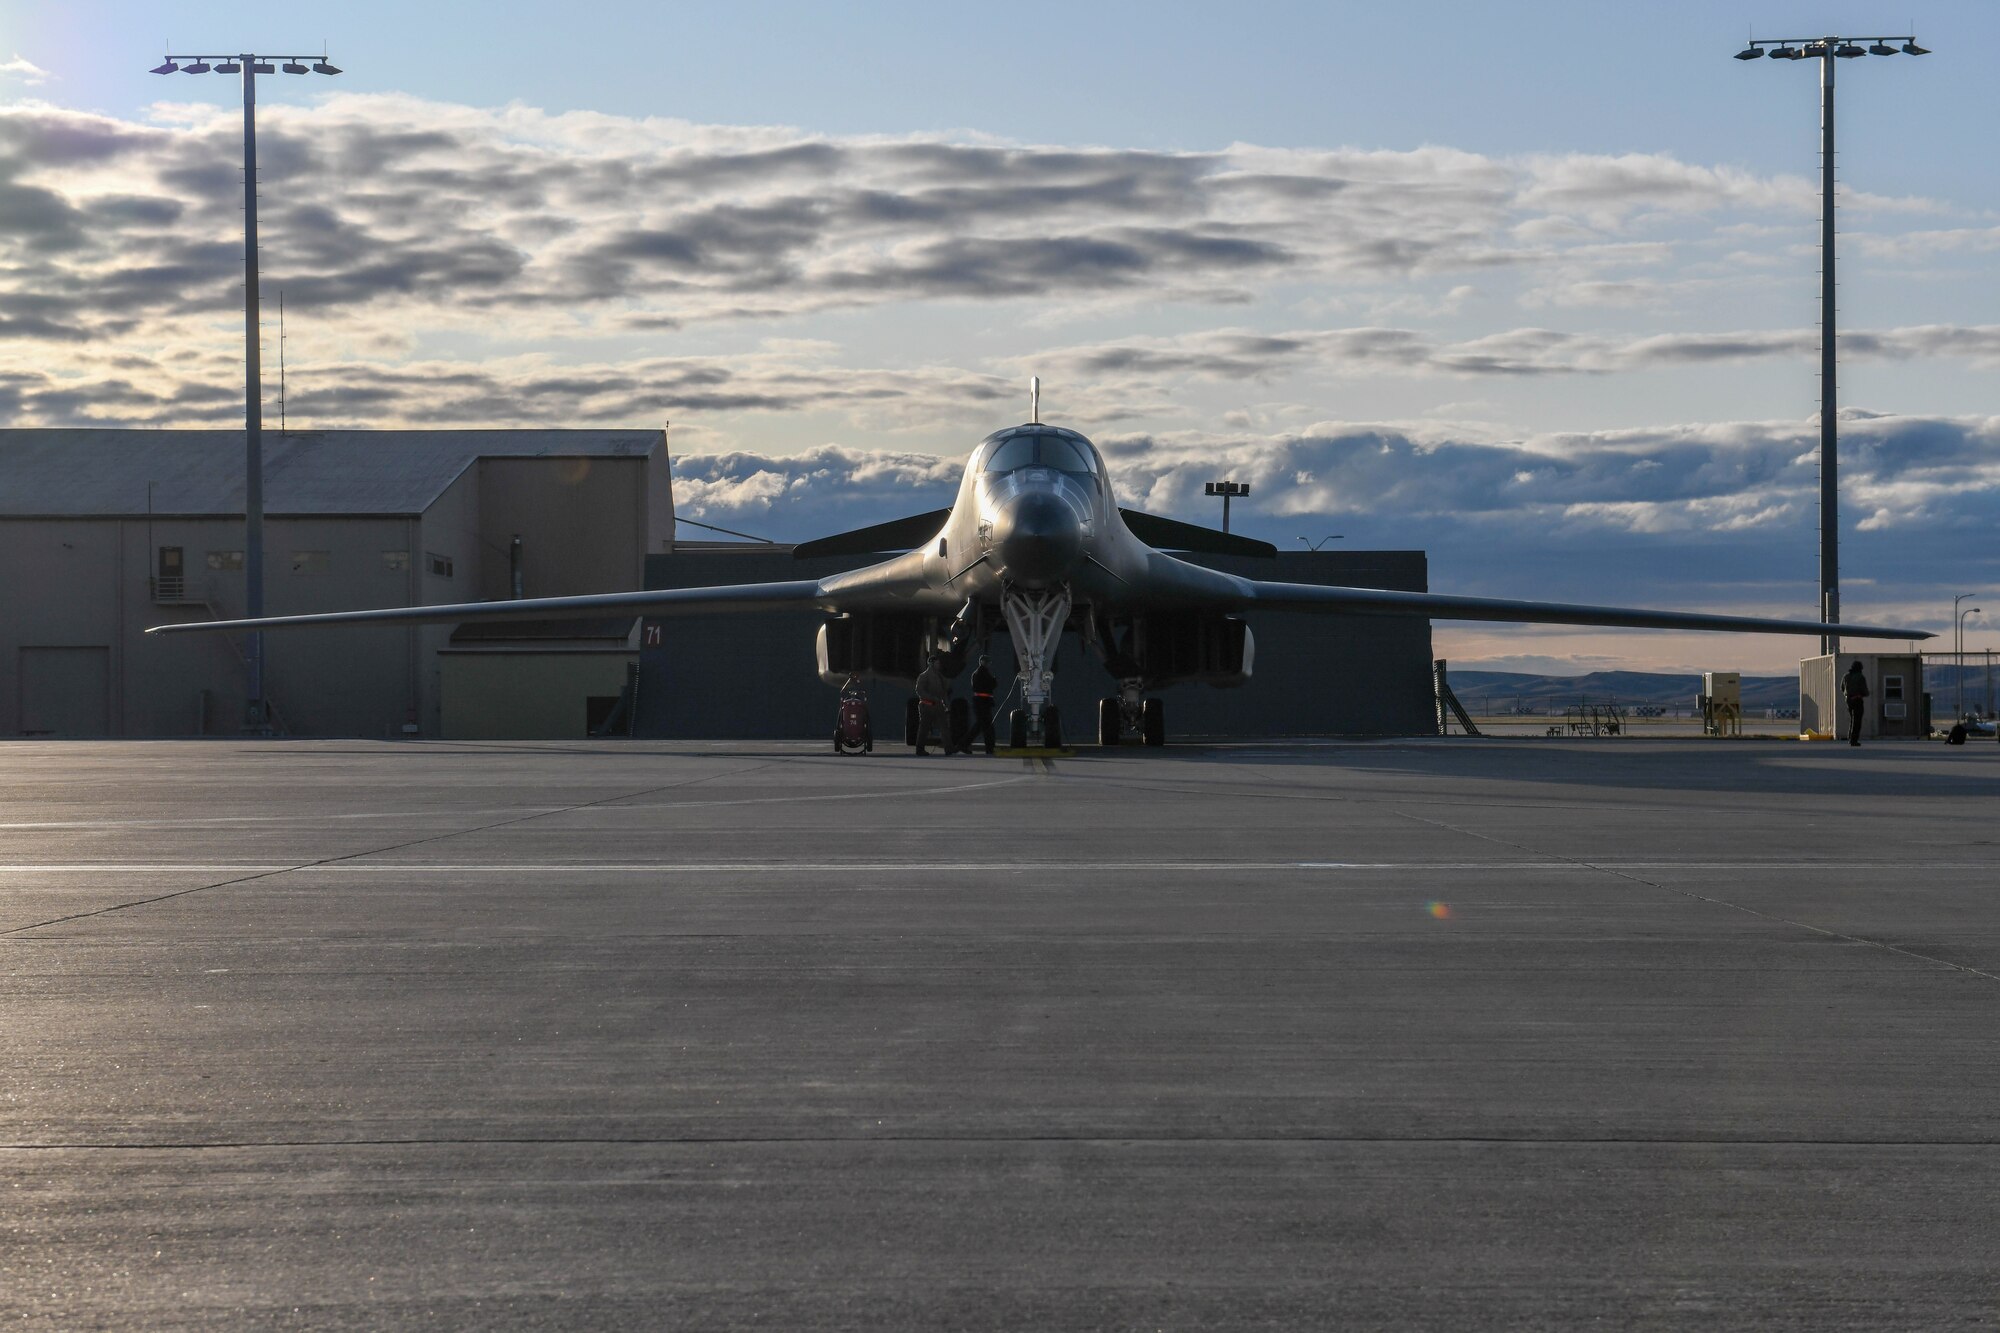 The B-1B Lancer sits on the row early in the morning at Ellsworth Air Force Base, S.D., prior launching to support a Bomber Task Force in the U.S. Central Command area of operations, Oct. 24, 2019. The deployment of this aircraft allows the United States and regional partner nations’ militaries to train and work together to strengthen military-to-military relationships, promote regional security, improve combined tactical air operations and enhance interoperability of forces. U.S. Strategic Command regularly tests and evaluates the readiness of strategic assets to ensure we are able to honor our security commitments. (U.S. Air Force photo by Senior Airman Nicolas Erwin)